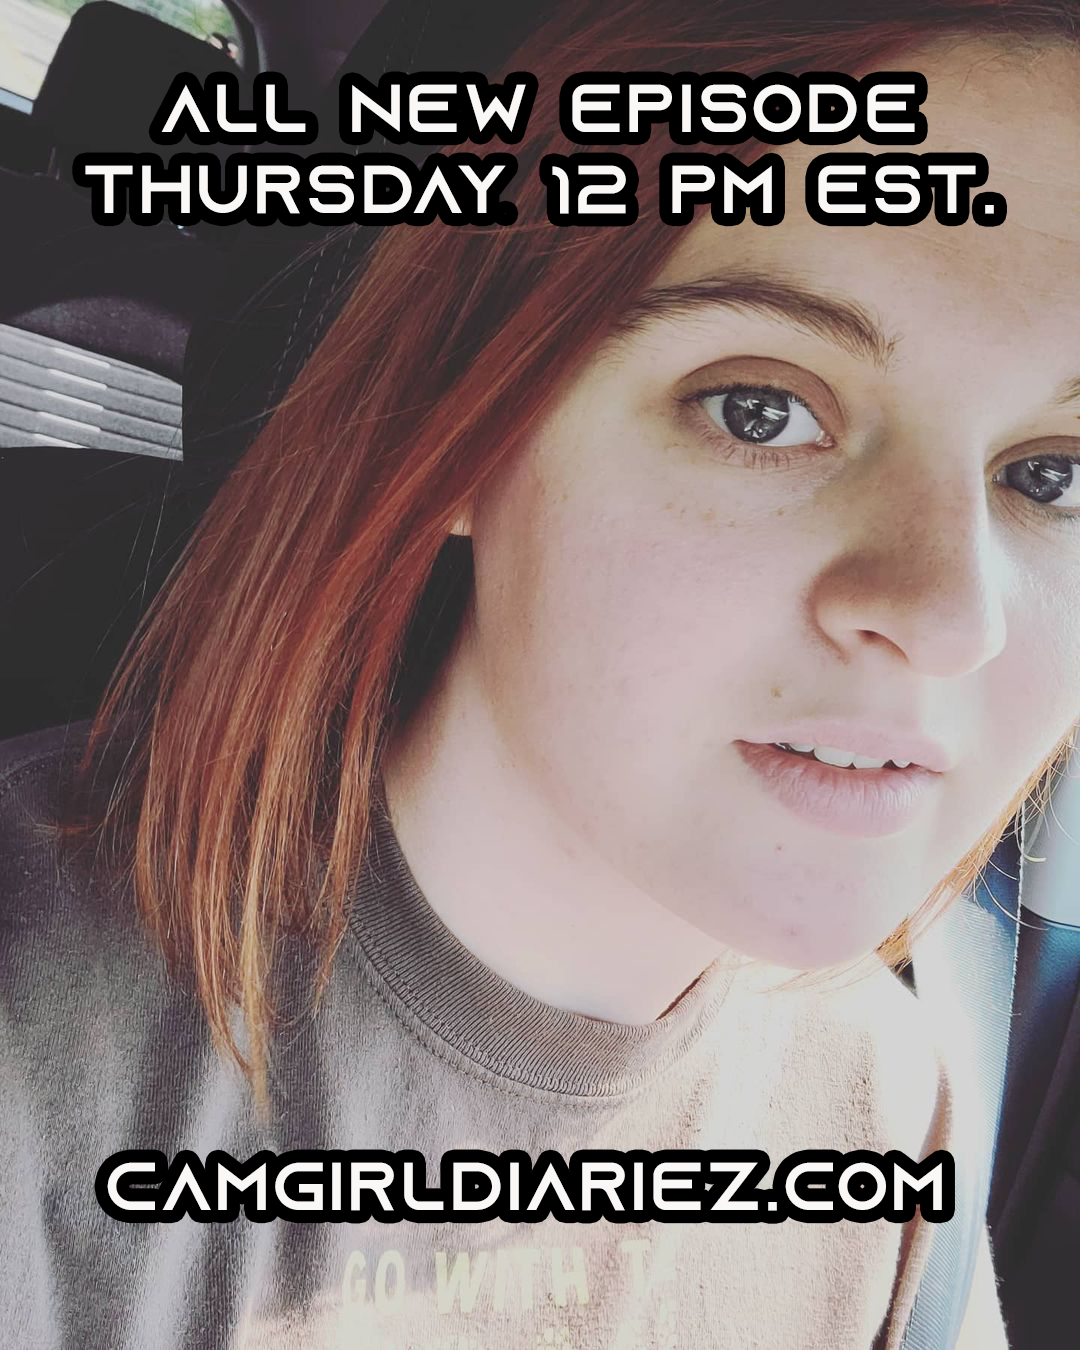 Photo by Cam Girl Podcast with the username @CamGirlDiaries, who is a brand user,  January 6, 2021 at 4:55 PM and the text says 'Thursdays Podcast Episode #4 features Kinky Chef! @thesexychef13 We have an amazing conversation on everything from cam girl advice to the difference between free porn vs custom content & much more! You'll be entertained and learn some things, especially..'